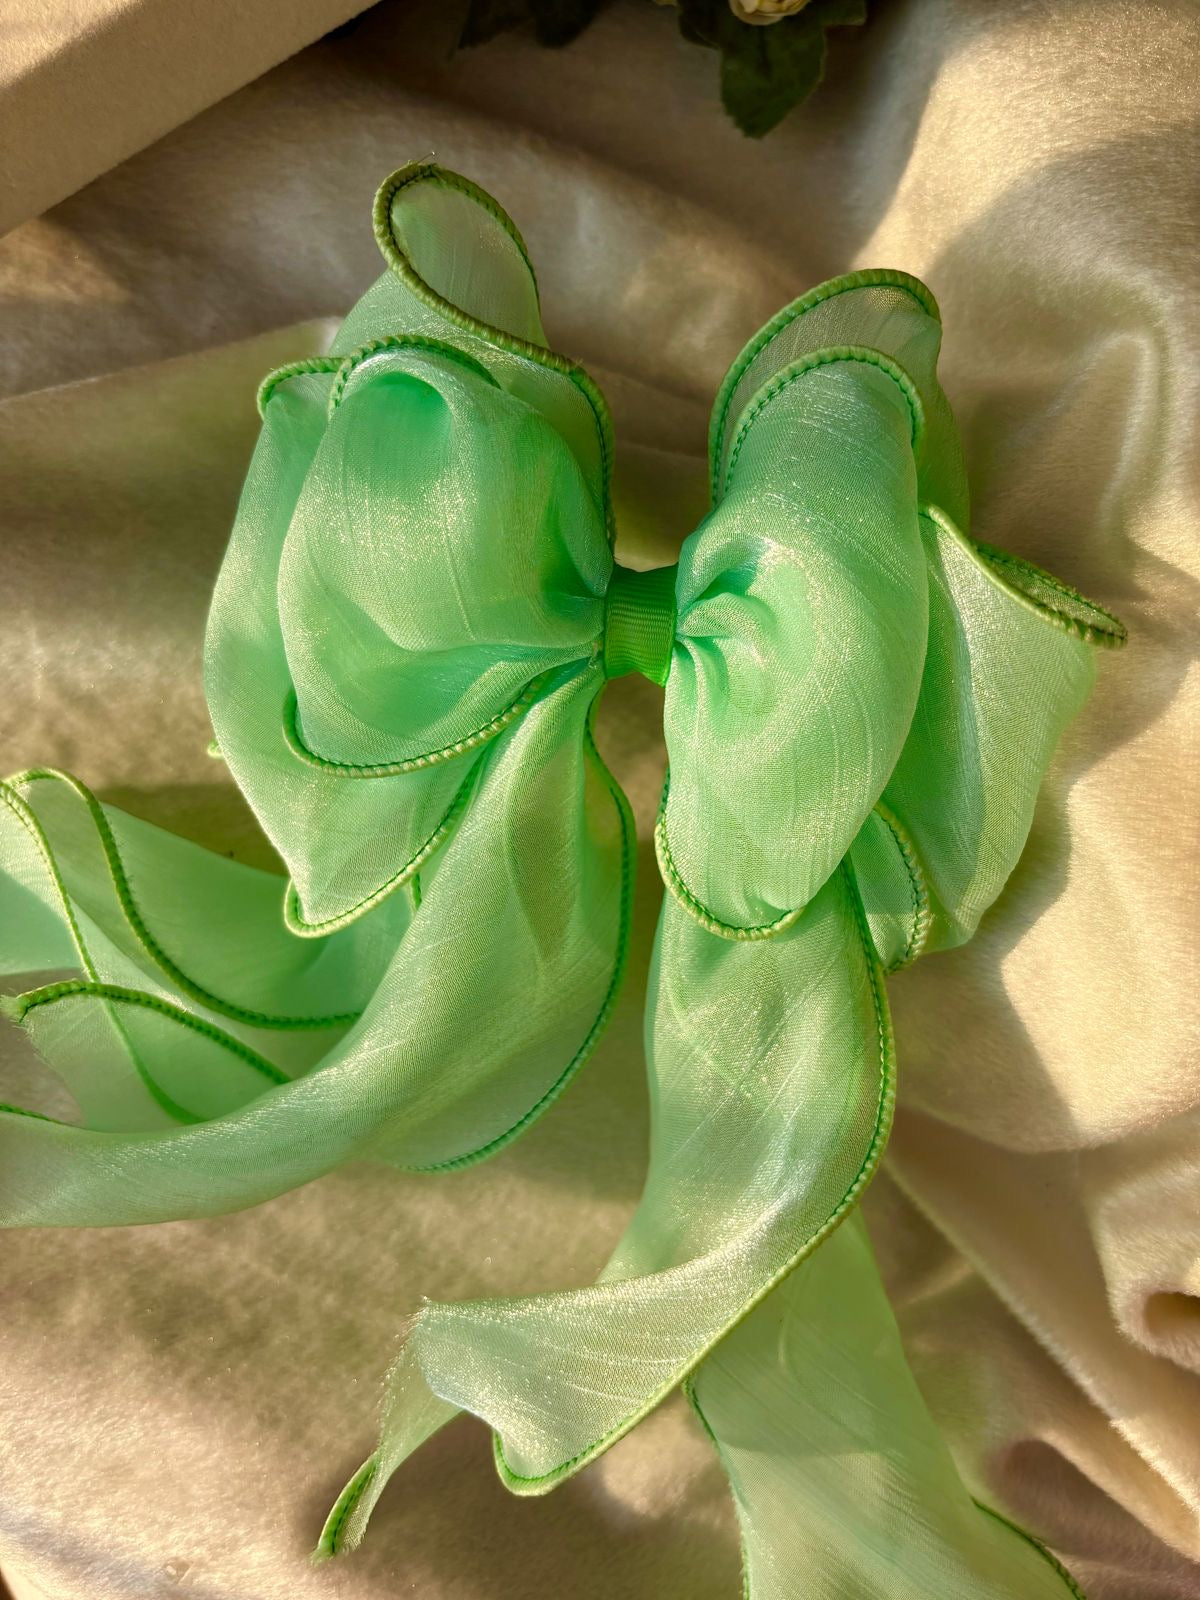 Layered Princess Hair Bow Clip For Women ( Ocean Green Netted )